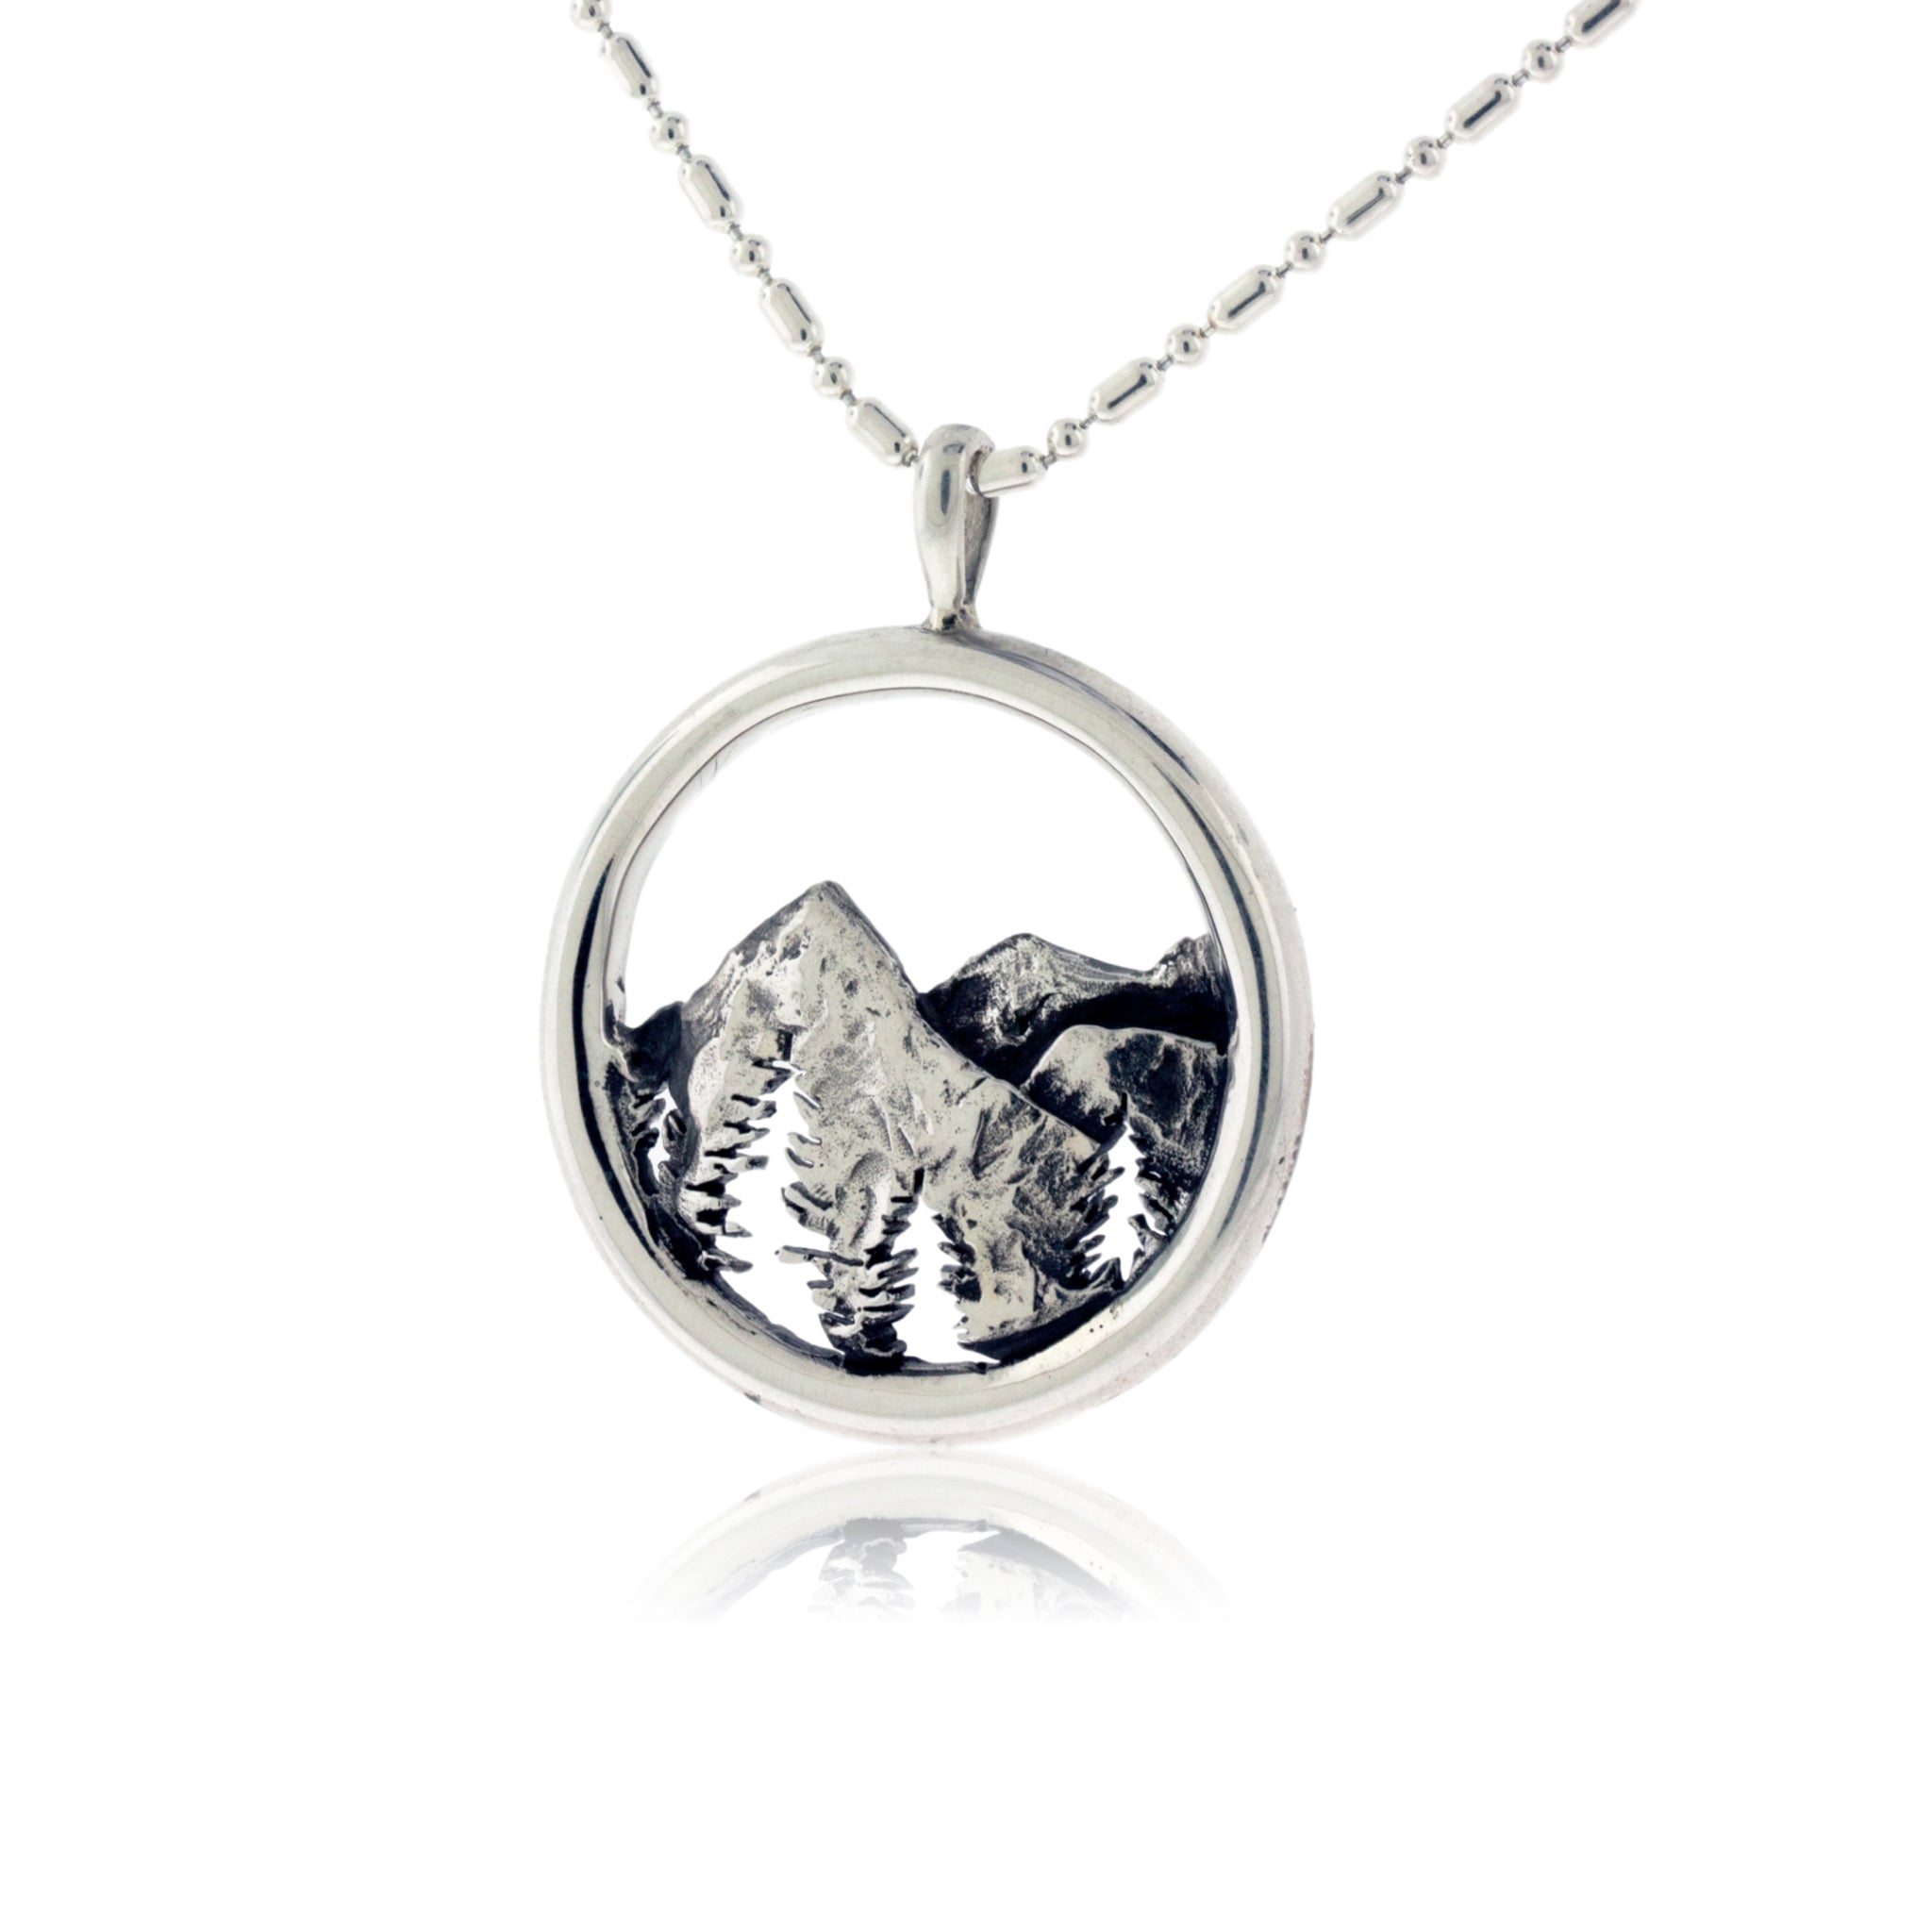 Moose Mountain Necklace – Mountain jewelry